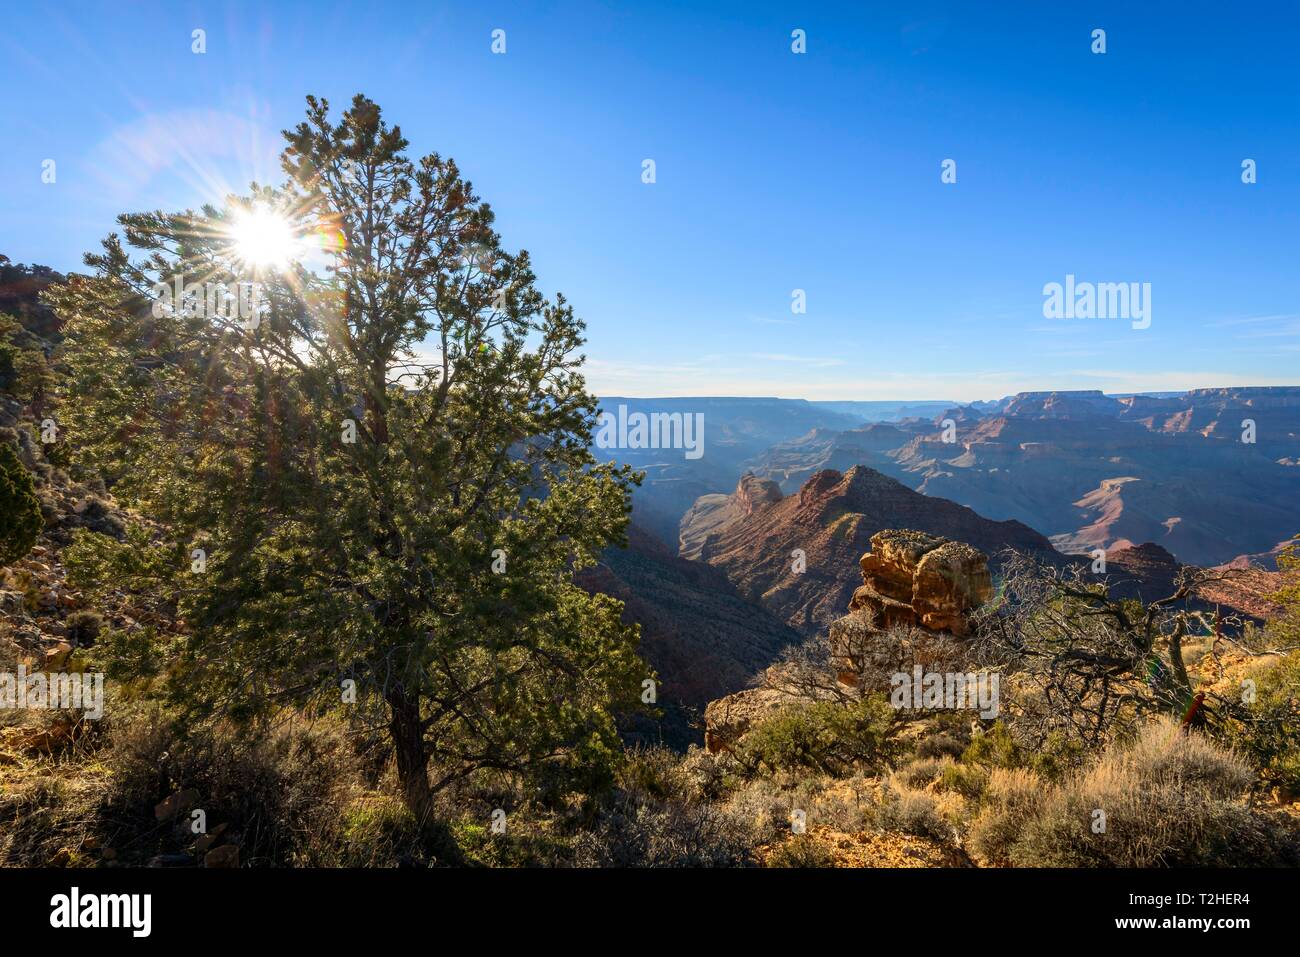 Sun, sun star shining through a conifer tree at the edge of the Grand Canyon, eroded rocky landscape, South Rim, Grand Canyon National Park, Arizona Stock Photo